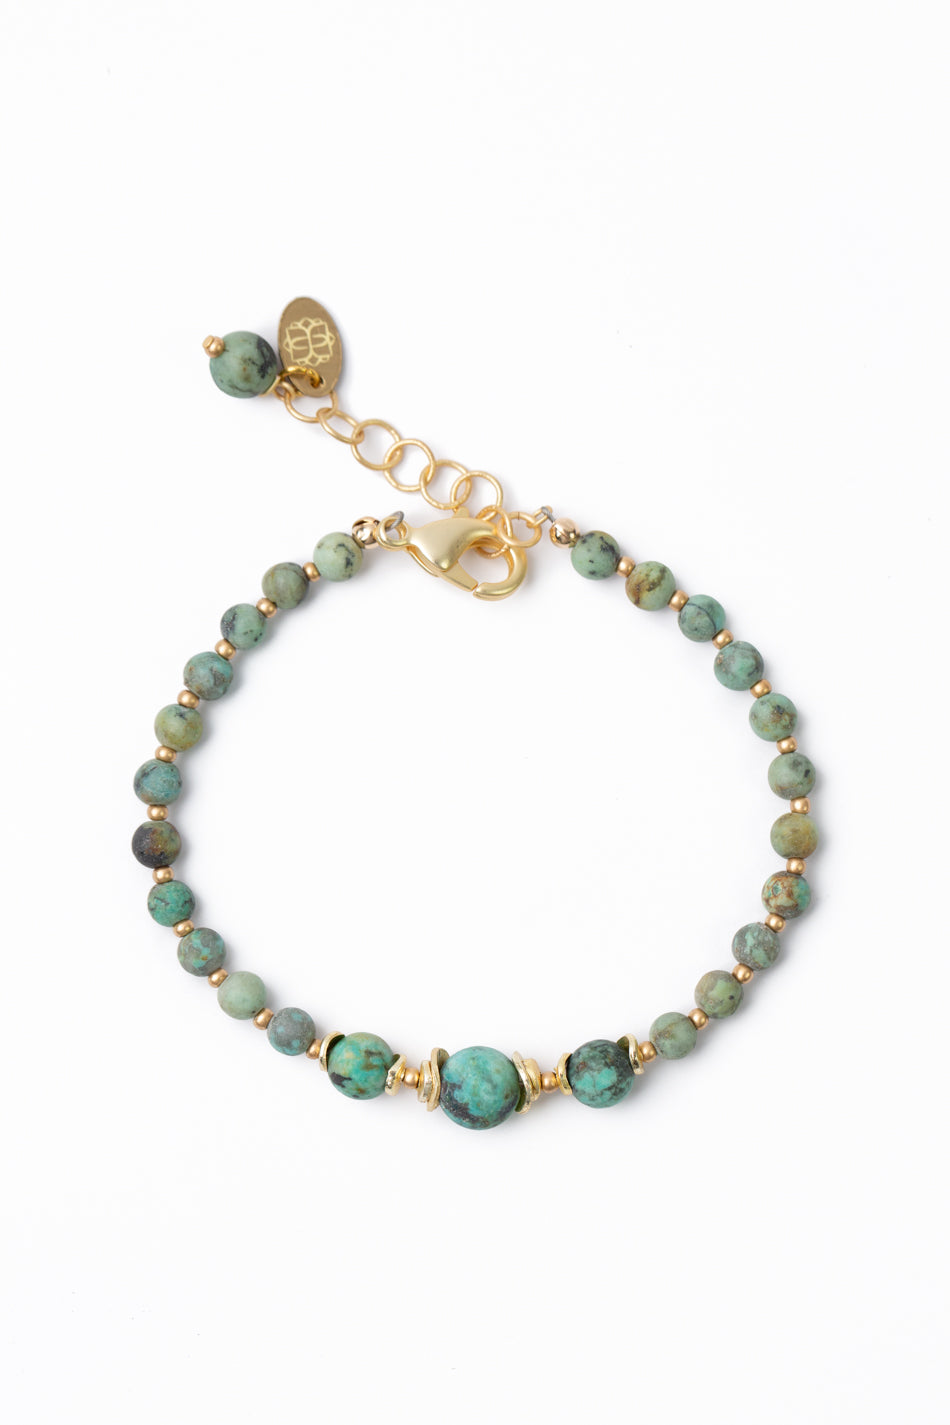 Tranquil Gardens 7.5-8.5" Simple African Turquoise Bracelet